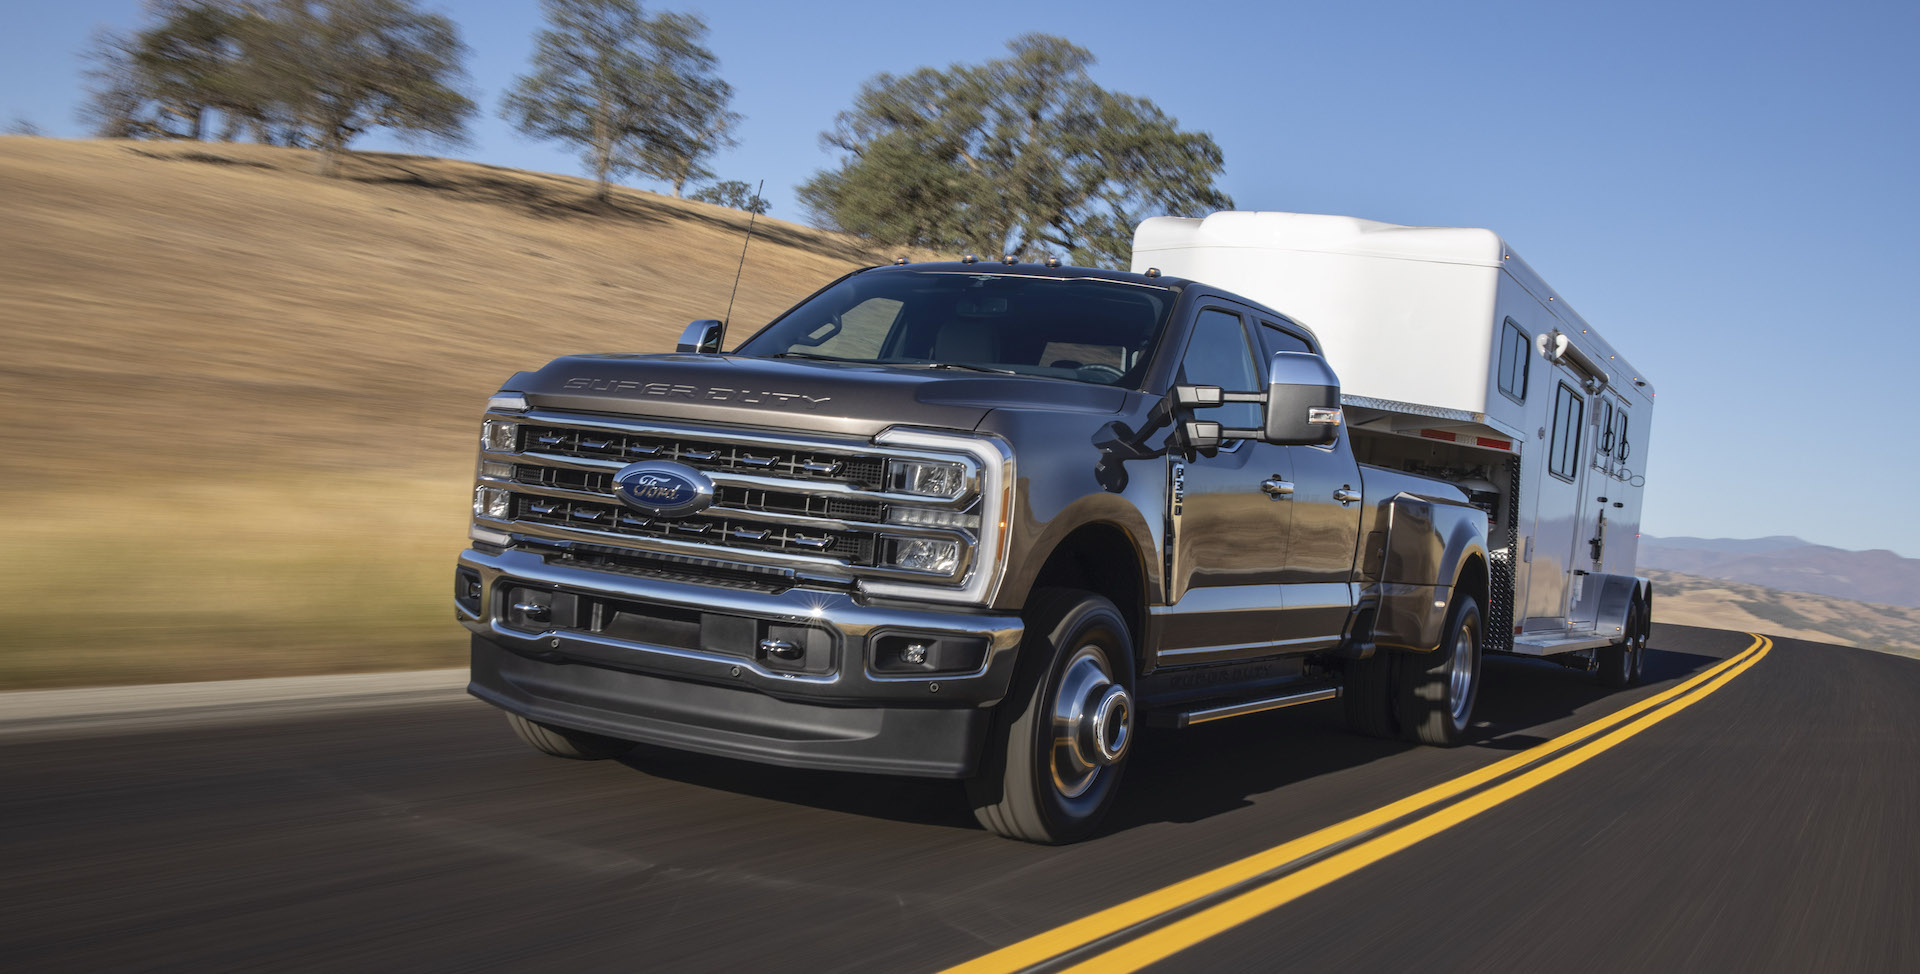 2023 Ford Super Duty rated up to 500 hp, 40,000 lb of towing Auto Recent